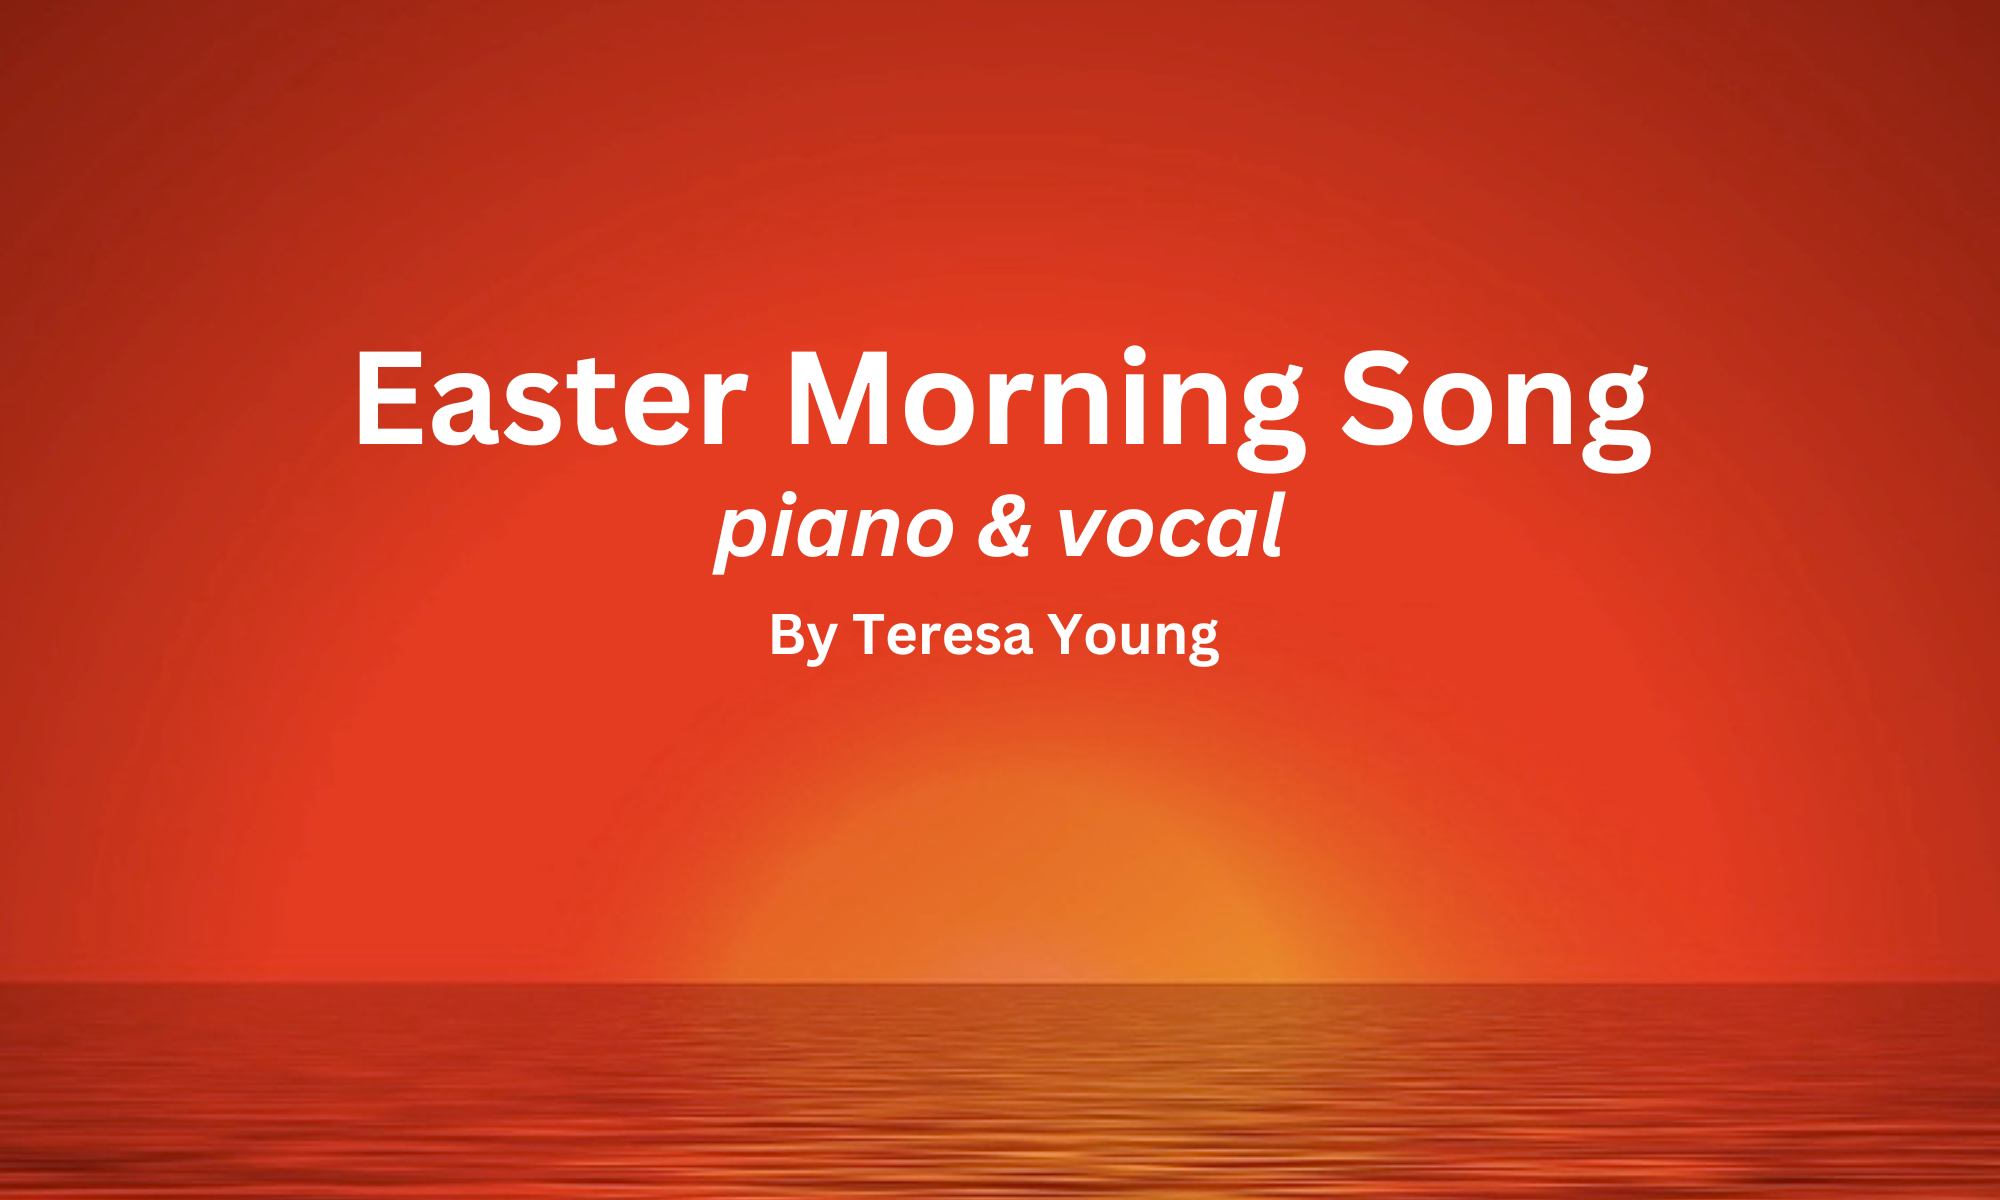 Easter Morning Song (piano & vocal), by Teresa Young